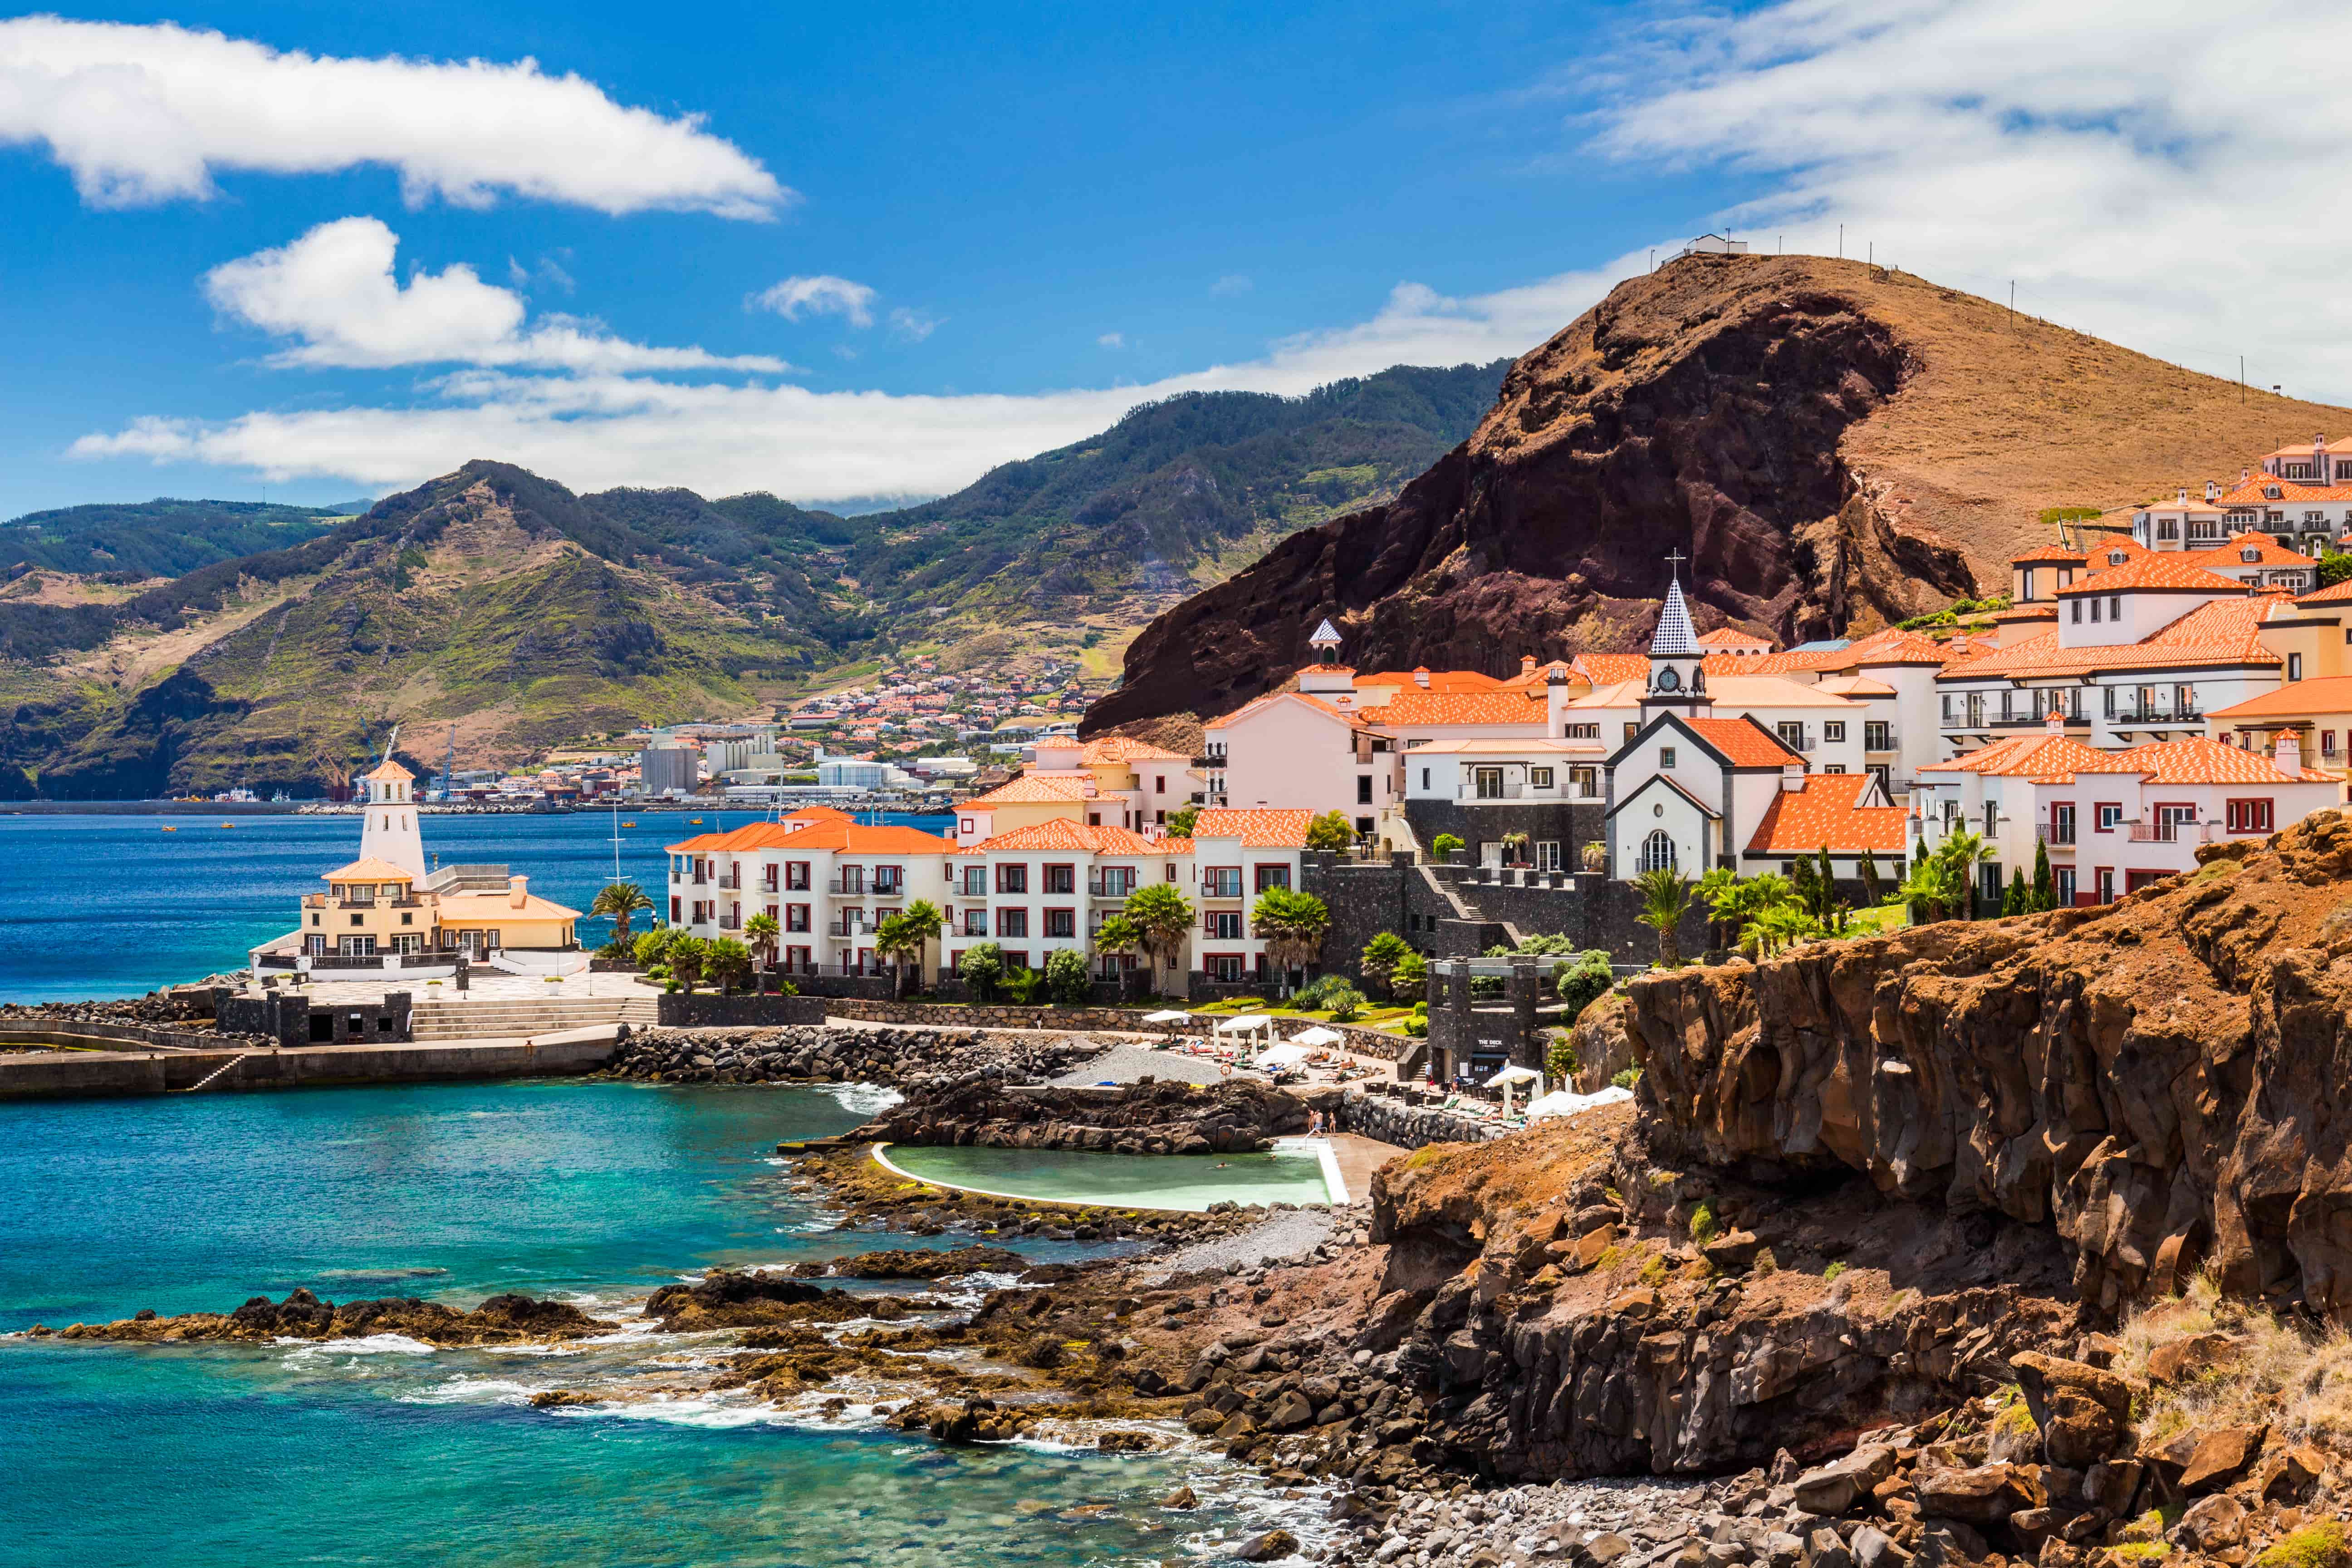 A paradise in the middle of the Atlantic: SkyUp to operate flights to Madeira